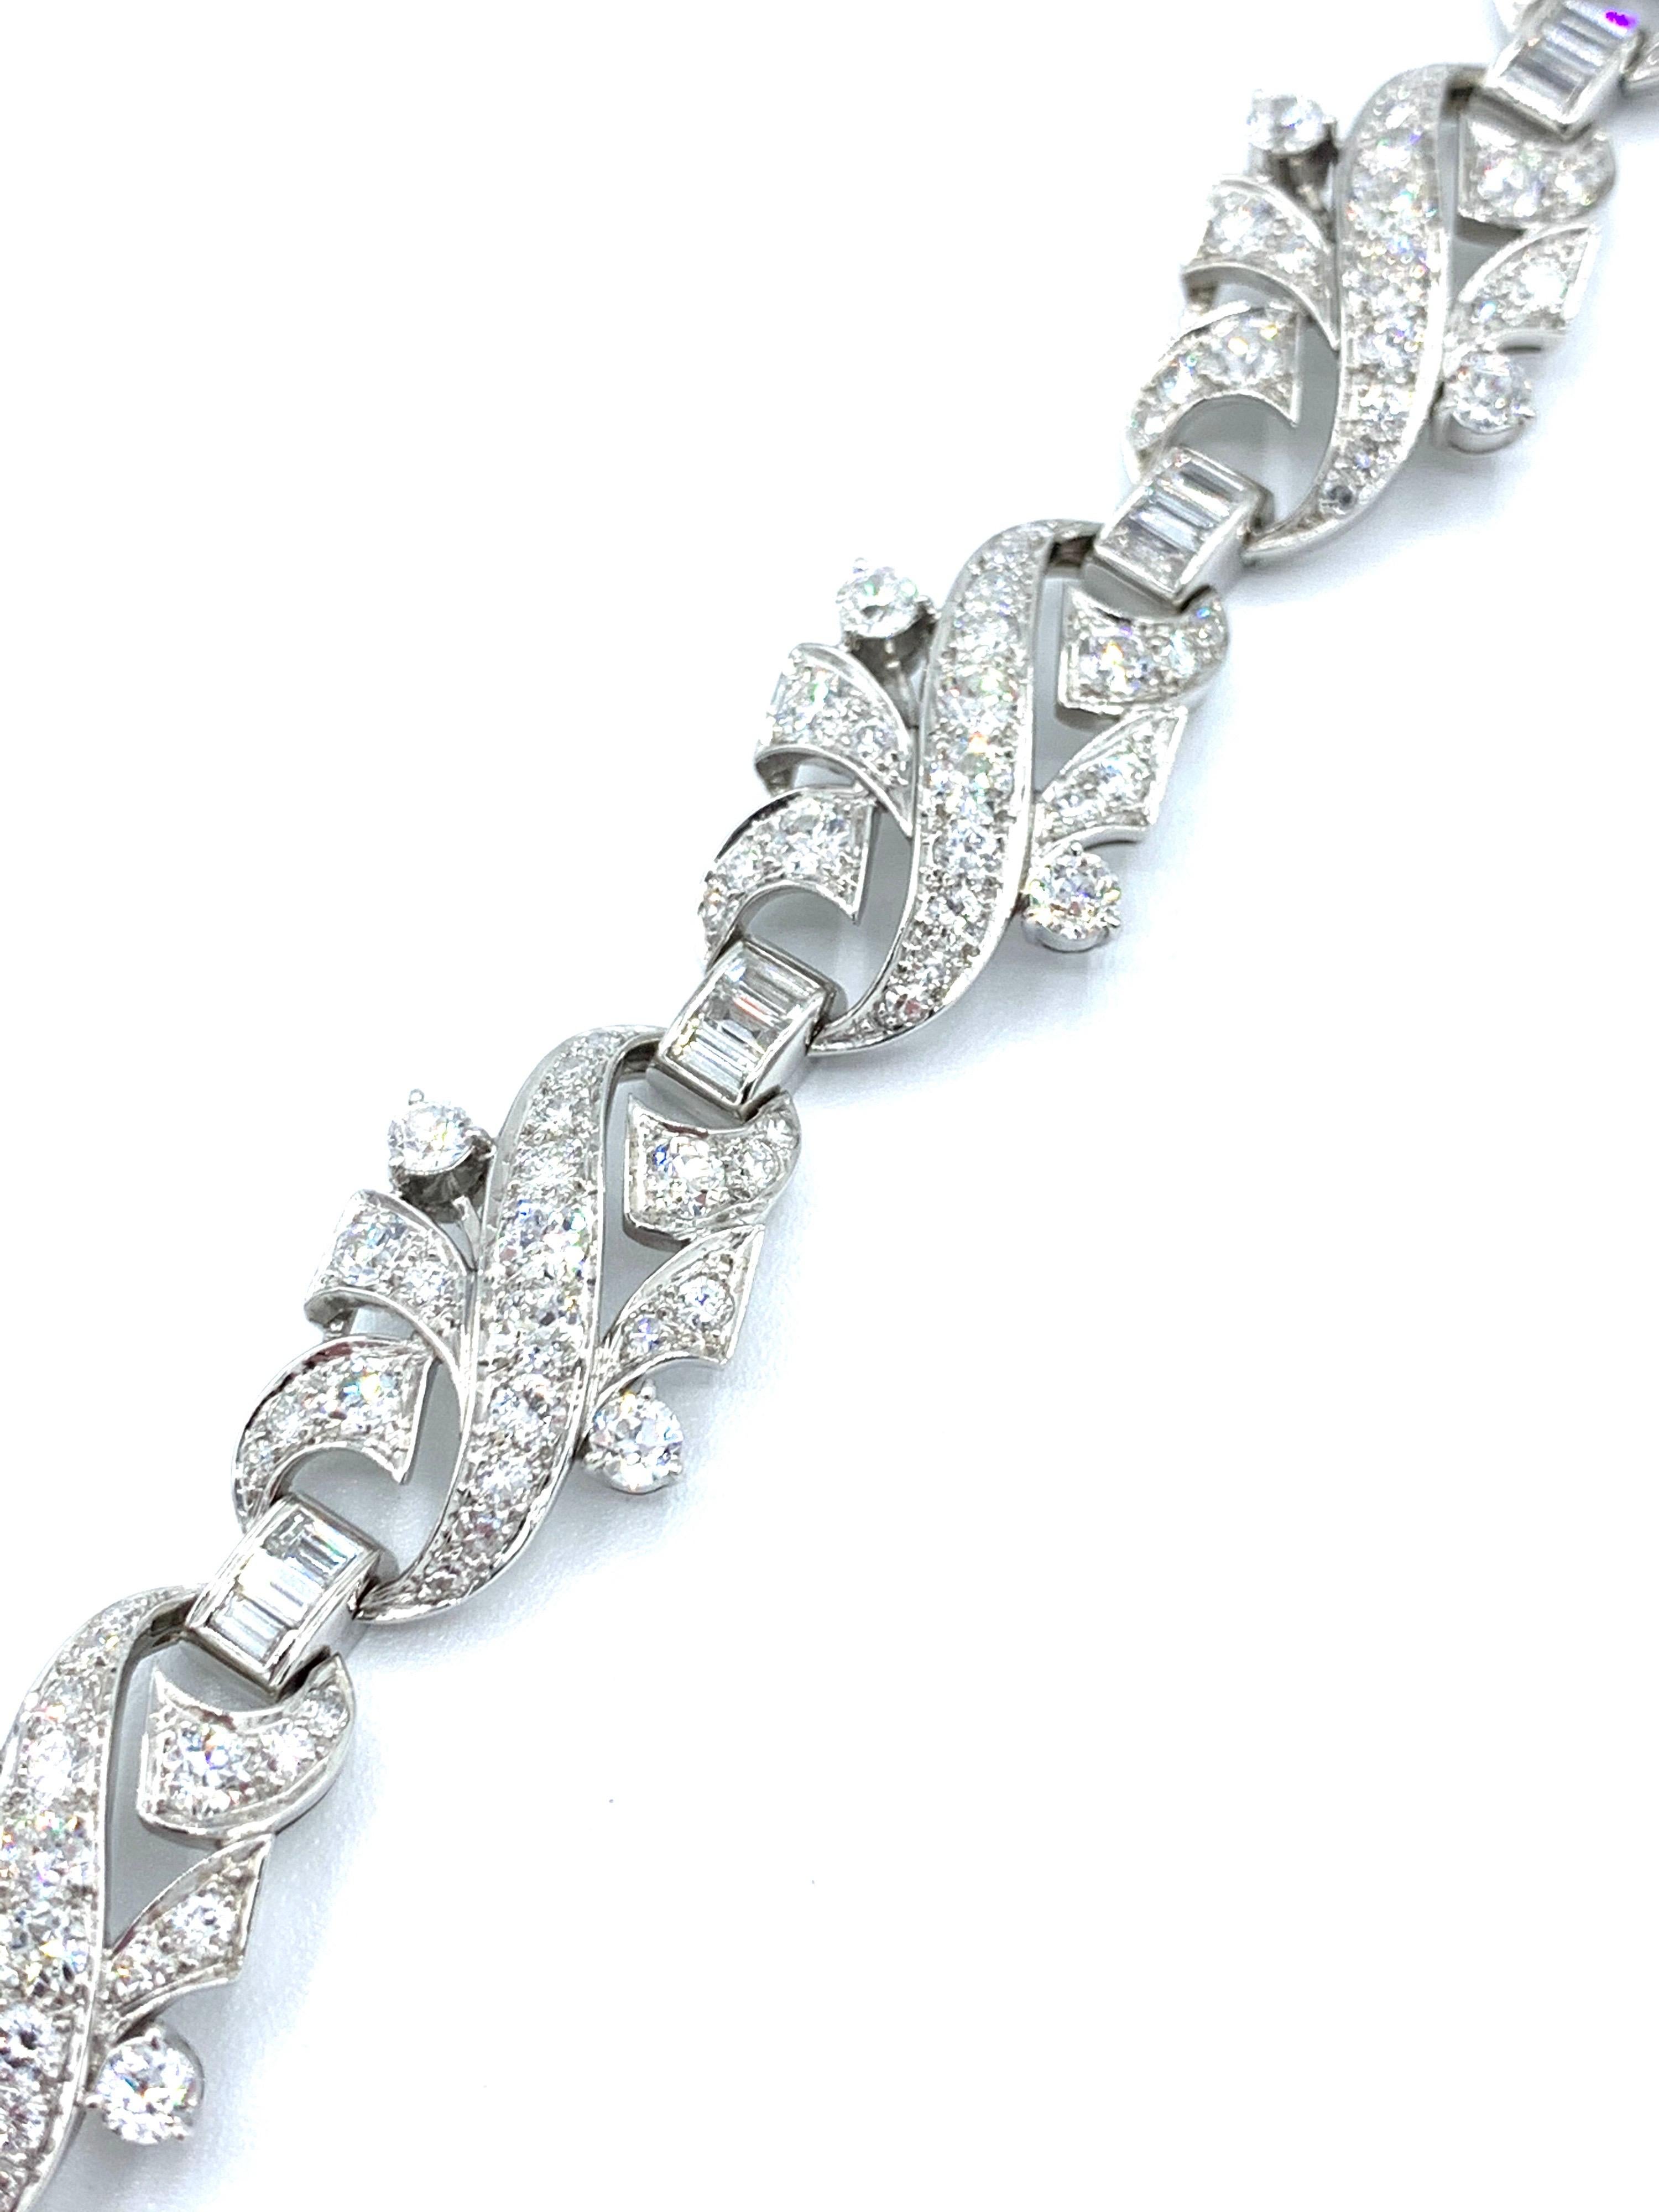 A stunning Art Deco Style Diamond and platinum bracelet.  The mix of round cuts and baguette Diamonds make this bracelet gleam with light!  The Diamonds have a total weight of 8.68 carats, and are graded as G-H color, VS clarity.  The bracelet